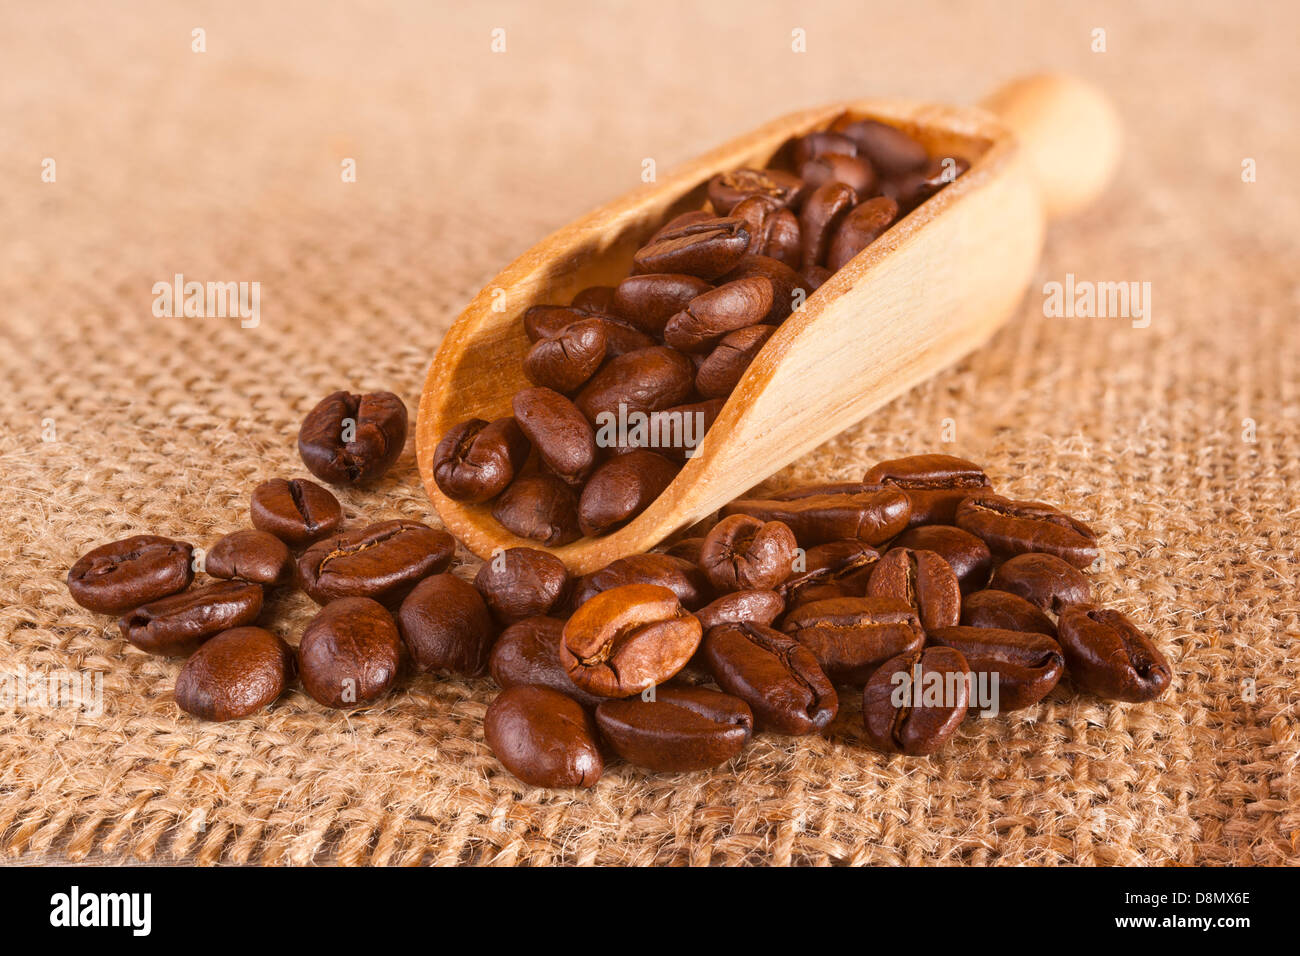 Coffee beans spilling from a scoop on a background of hessian or jute. Stock Photo